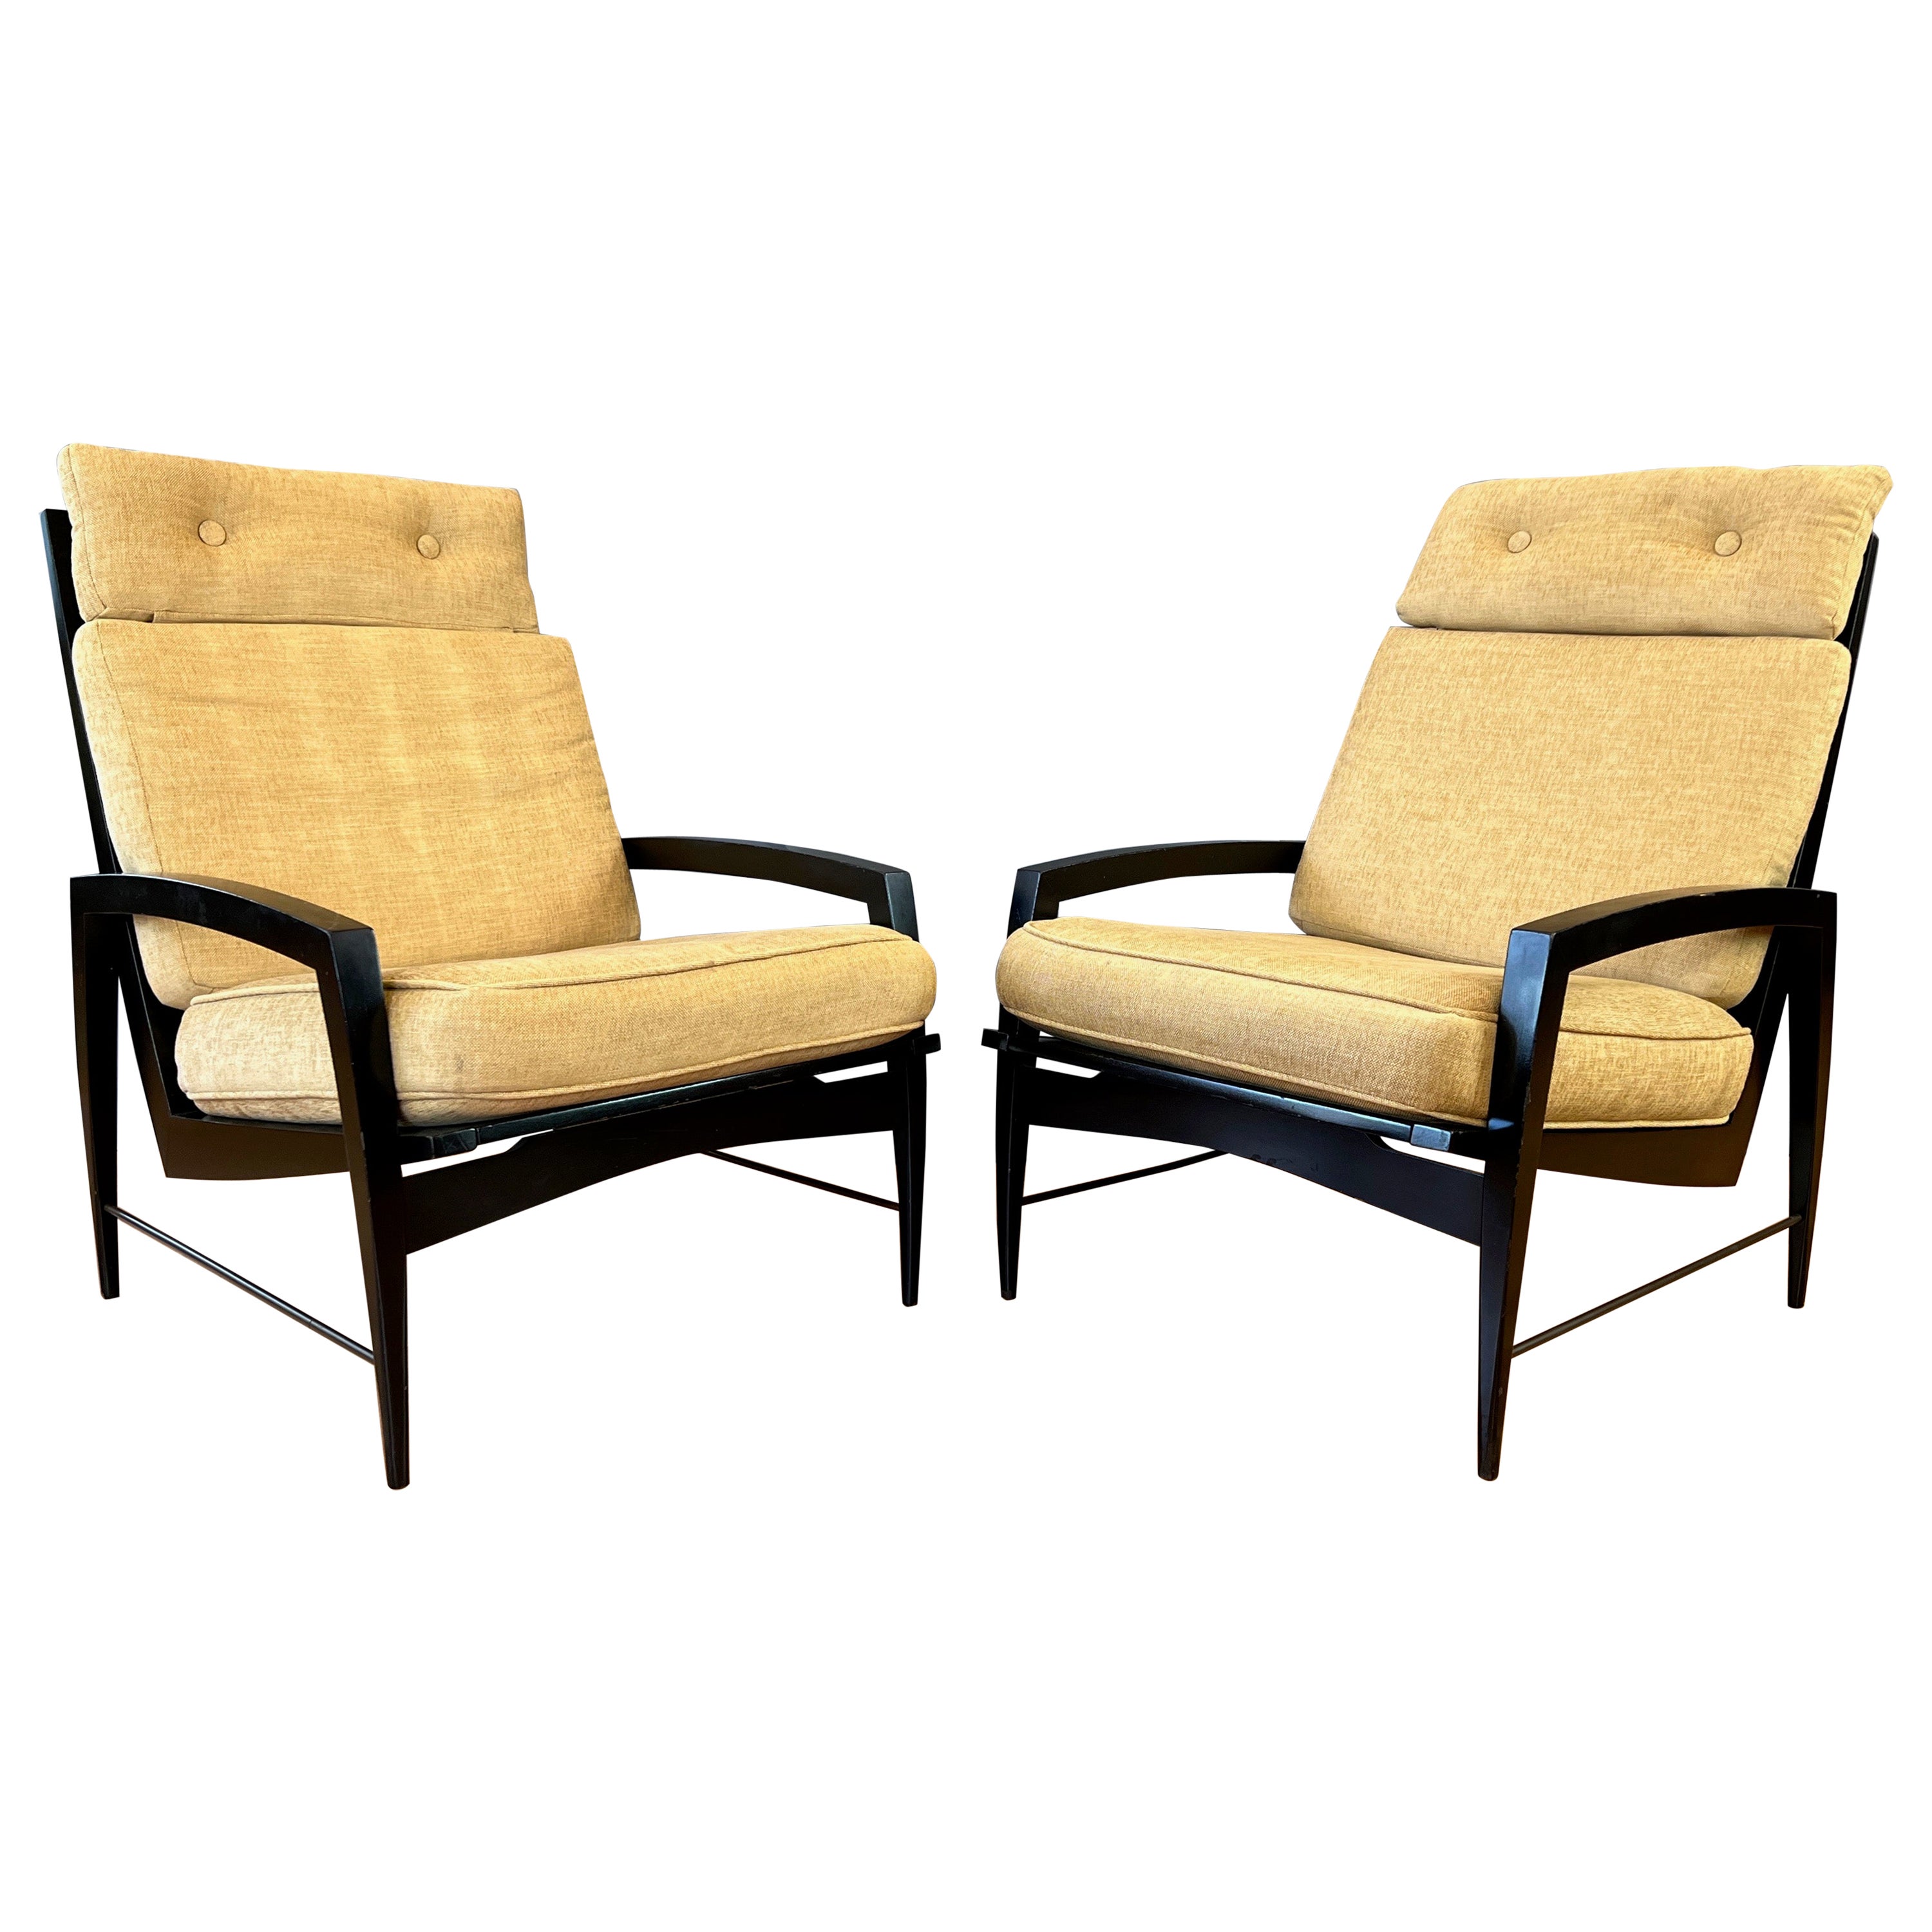 Pair of Dan Johnson for Selig Black Lacquered High-Back Lounge Chairs, 1950s For Sale